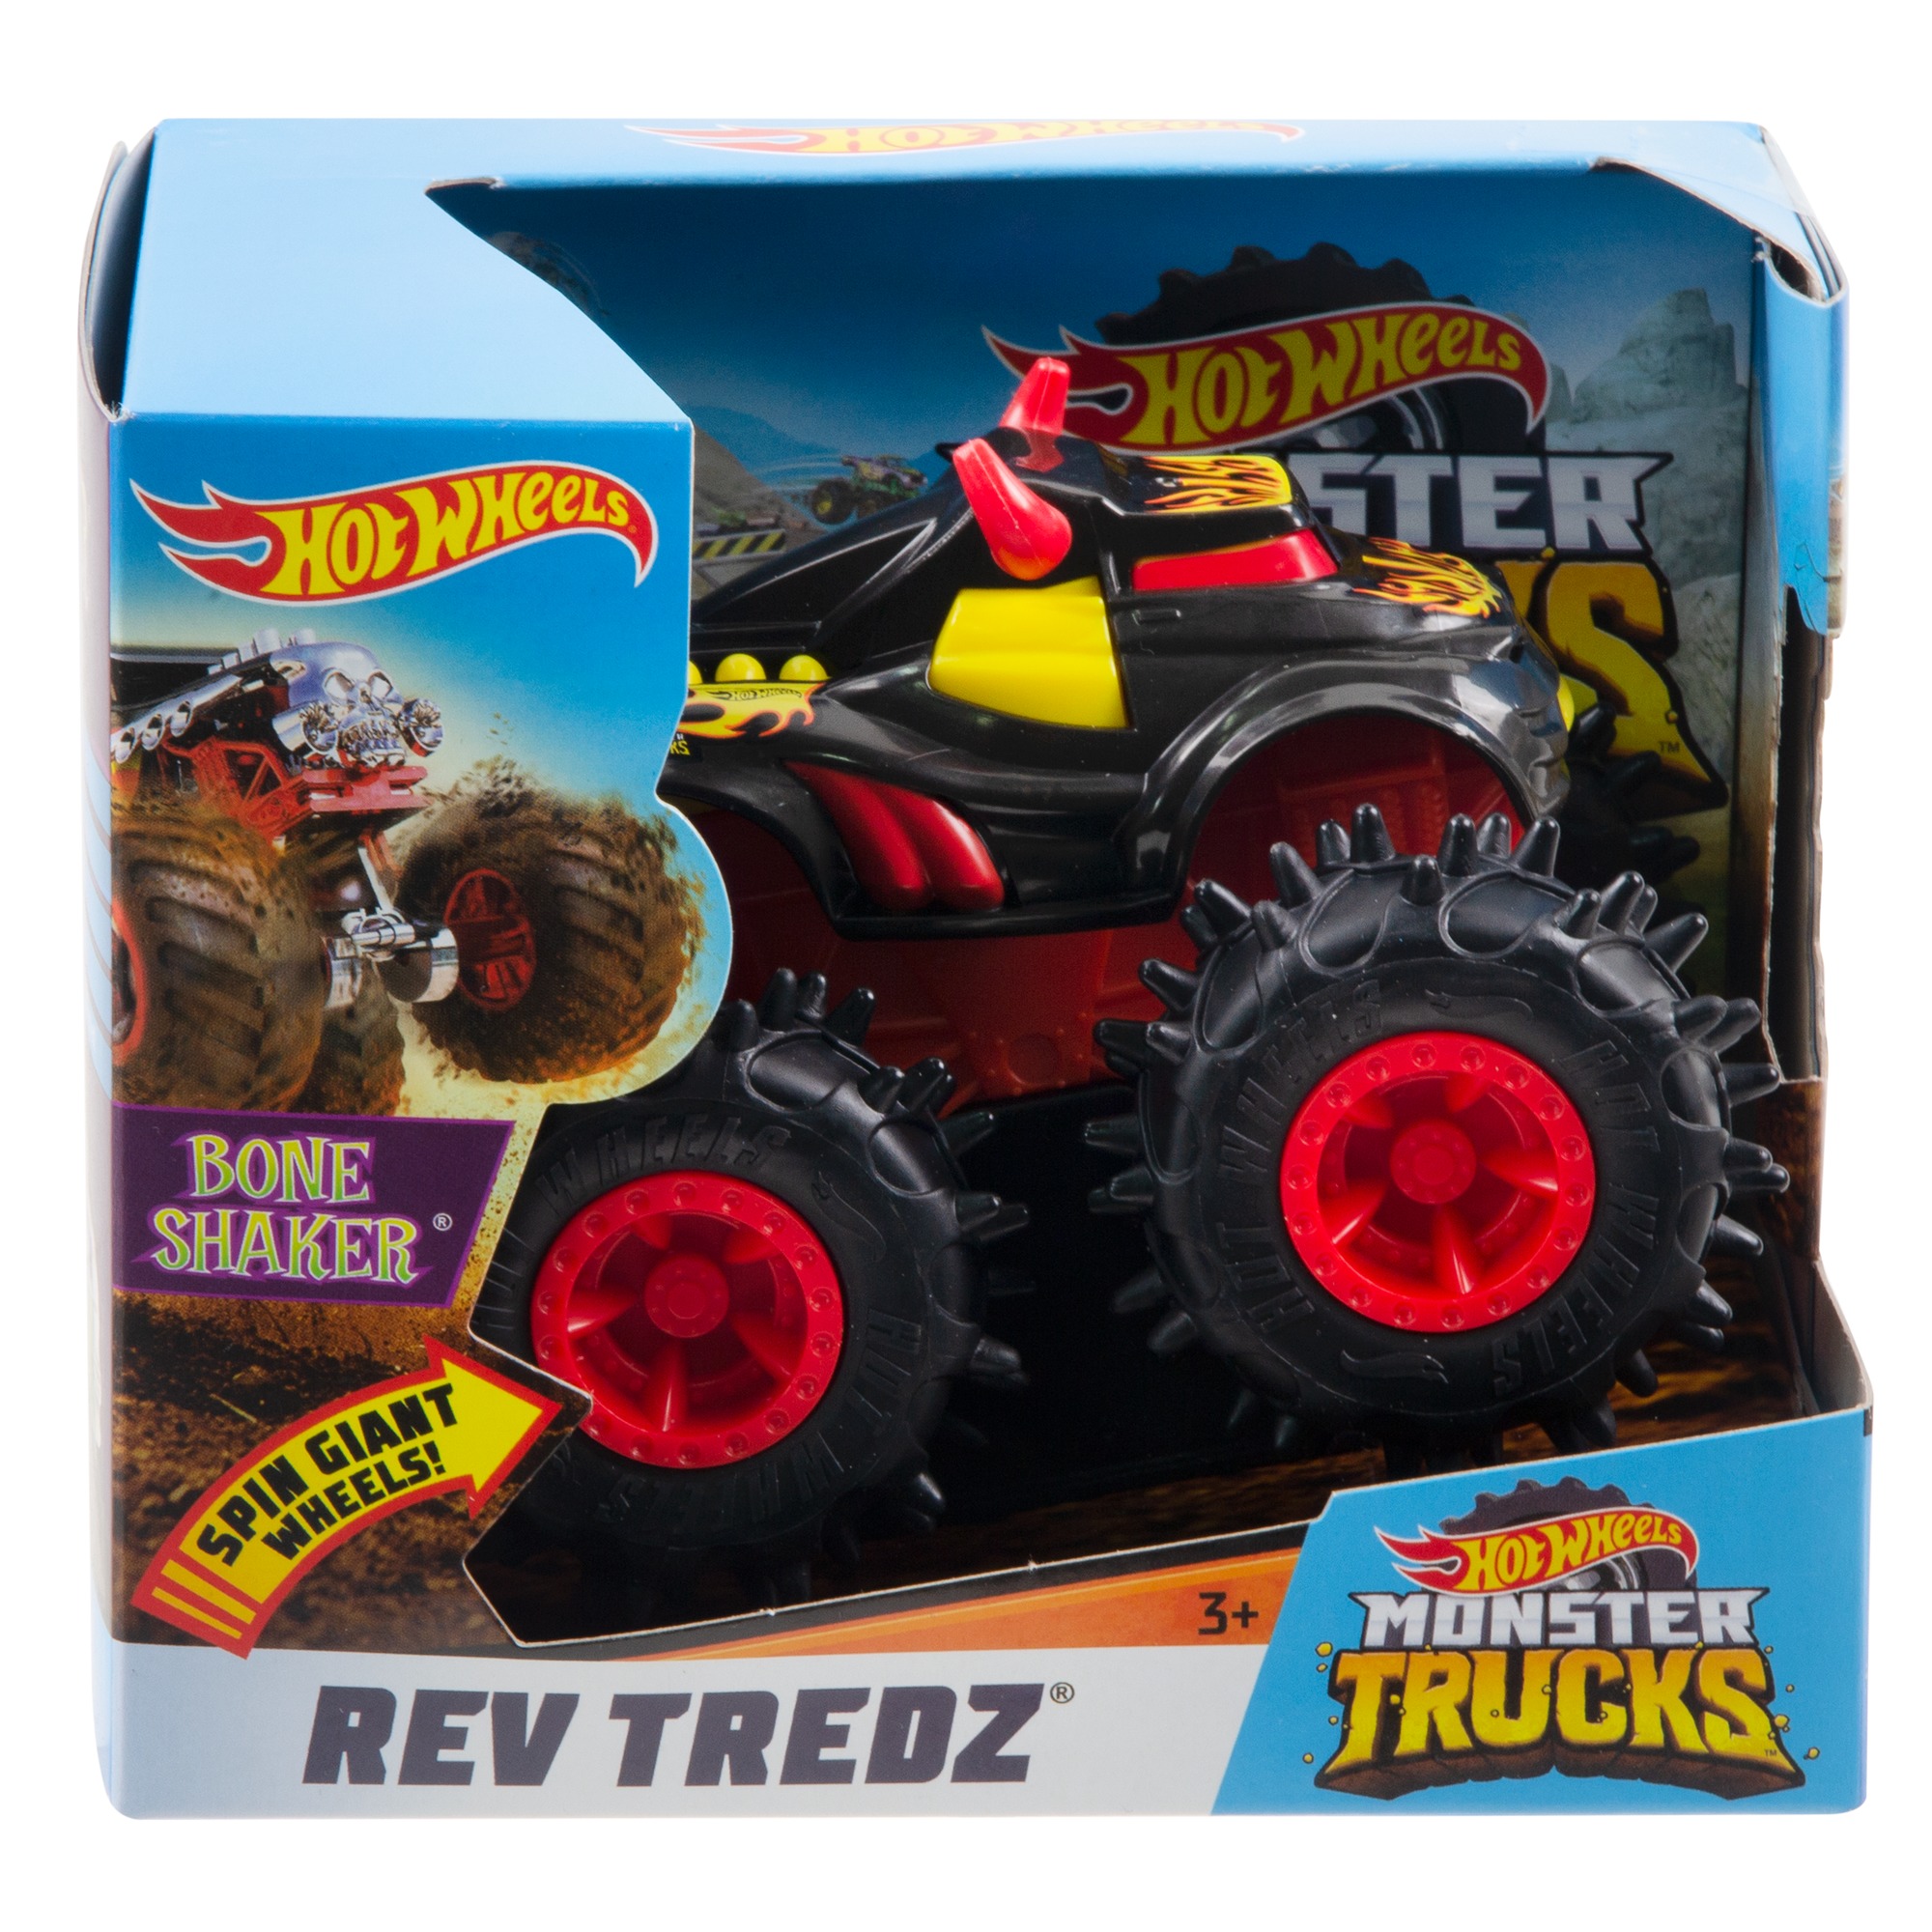 Monster Trucks By Hot Wheels 1:43 Scale Vehicle (Styles May Vary) - image 4 of 9